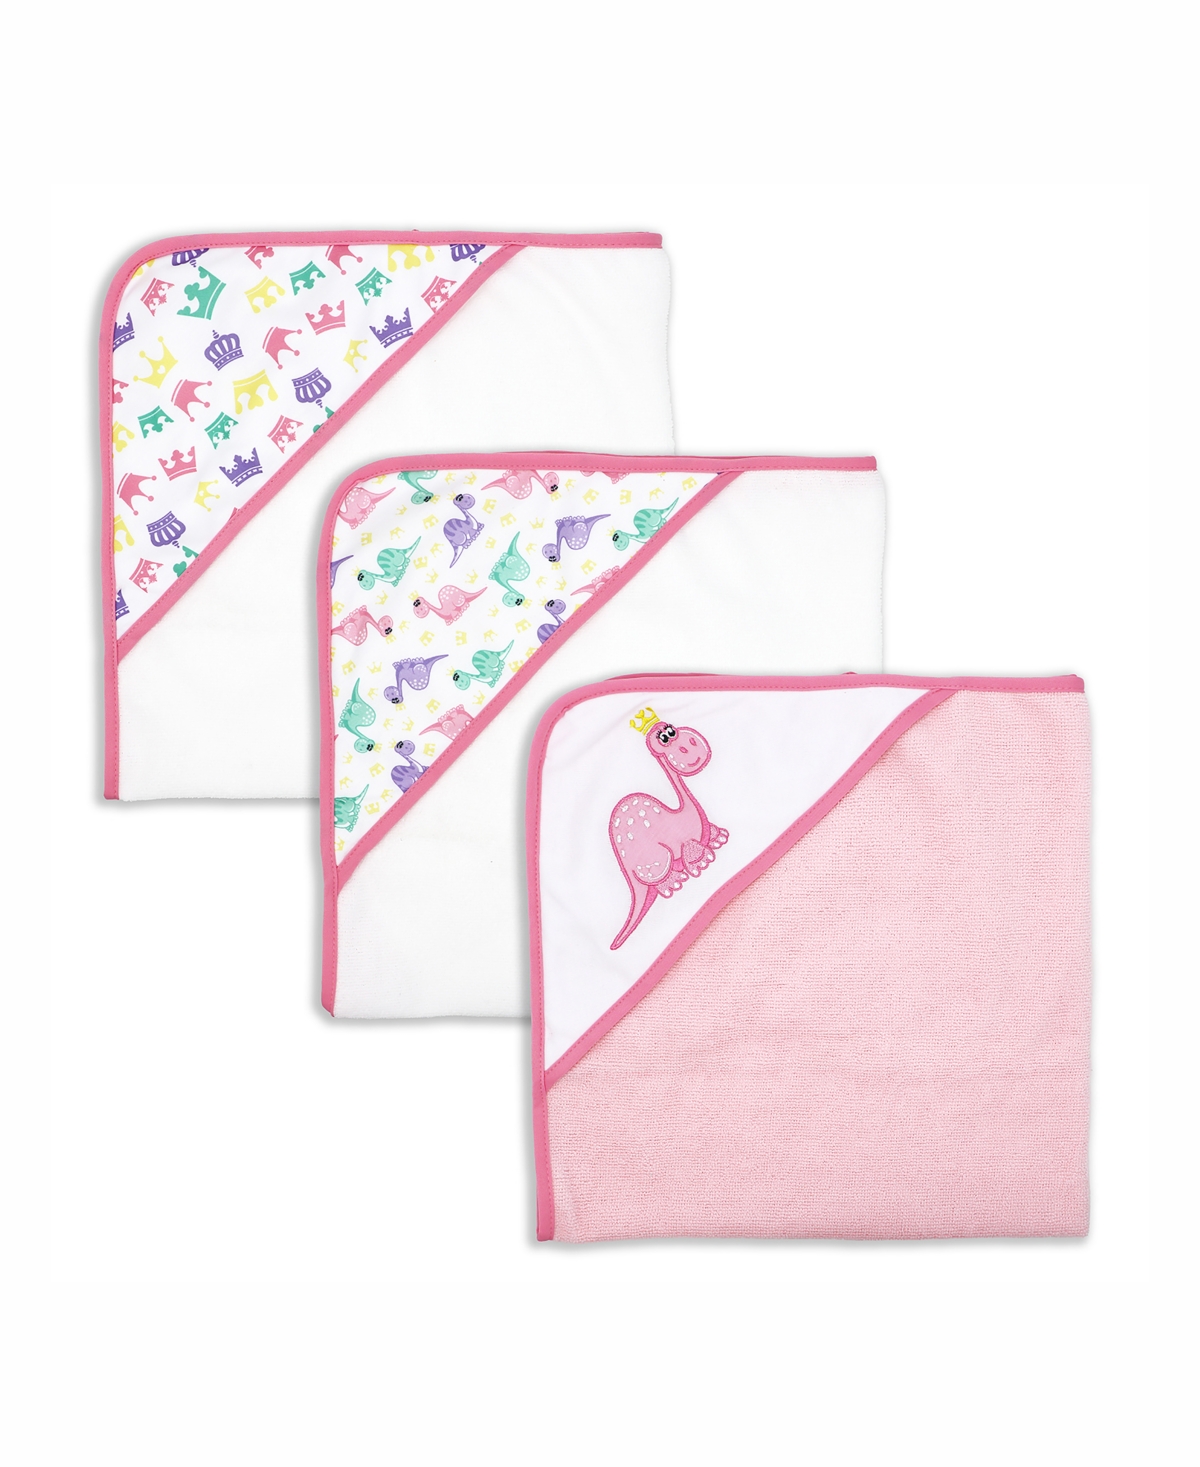 3 Stories Trading Baby Girls Hooded Towels, Pack Of 3 In Pink And White